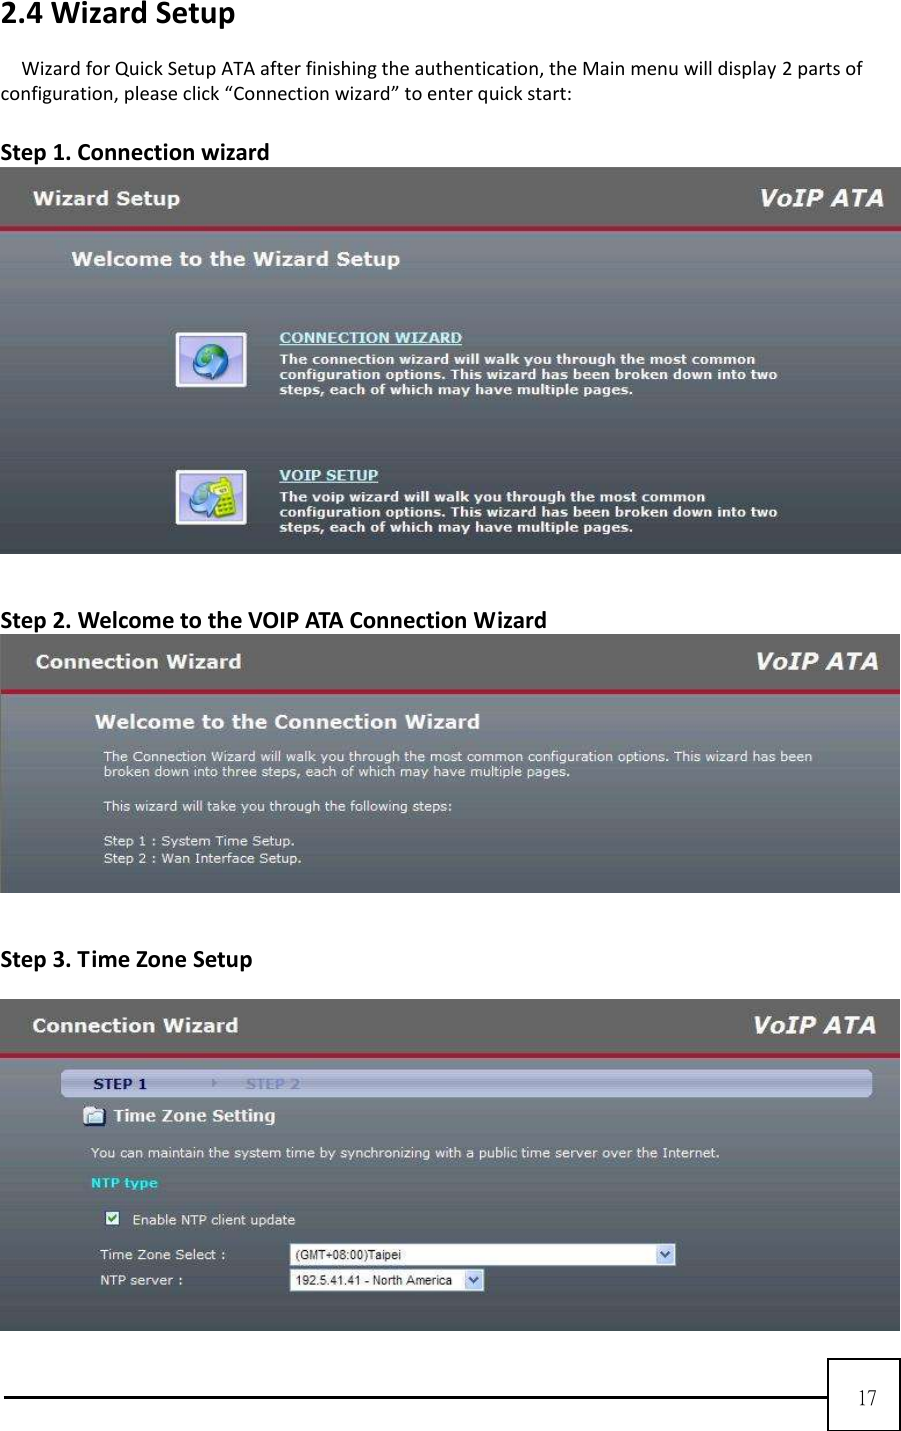  17   2.4 Wizard Setup  Wizard for Quick Setup ATA after finishing the authentication, the Main menu will display 2 parts of configuration, please click “Connection wizard” to enter quick start:  Step 1. Connection wizard      Step 2. Welcome to the VOIP ATA Connection Wizard    Step 3. Time Zone Setup    